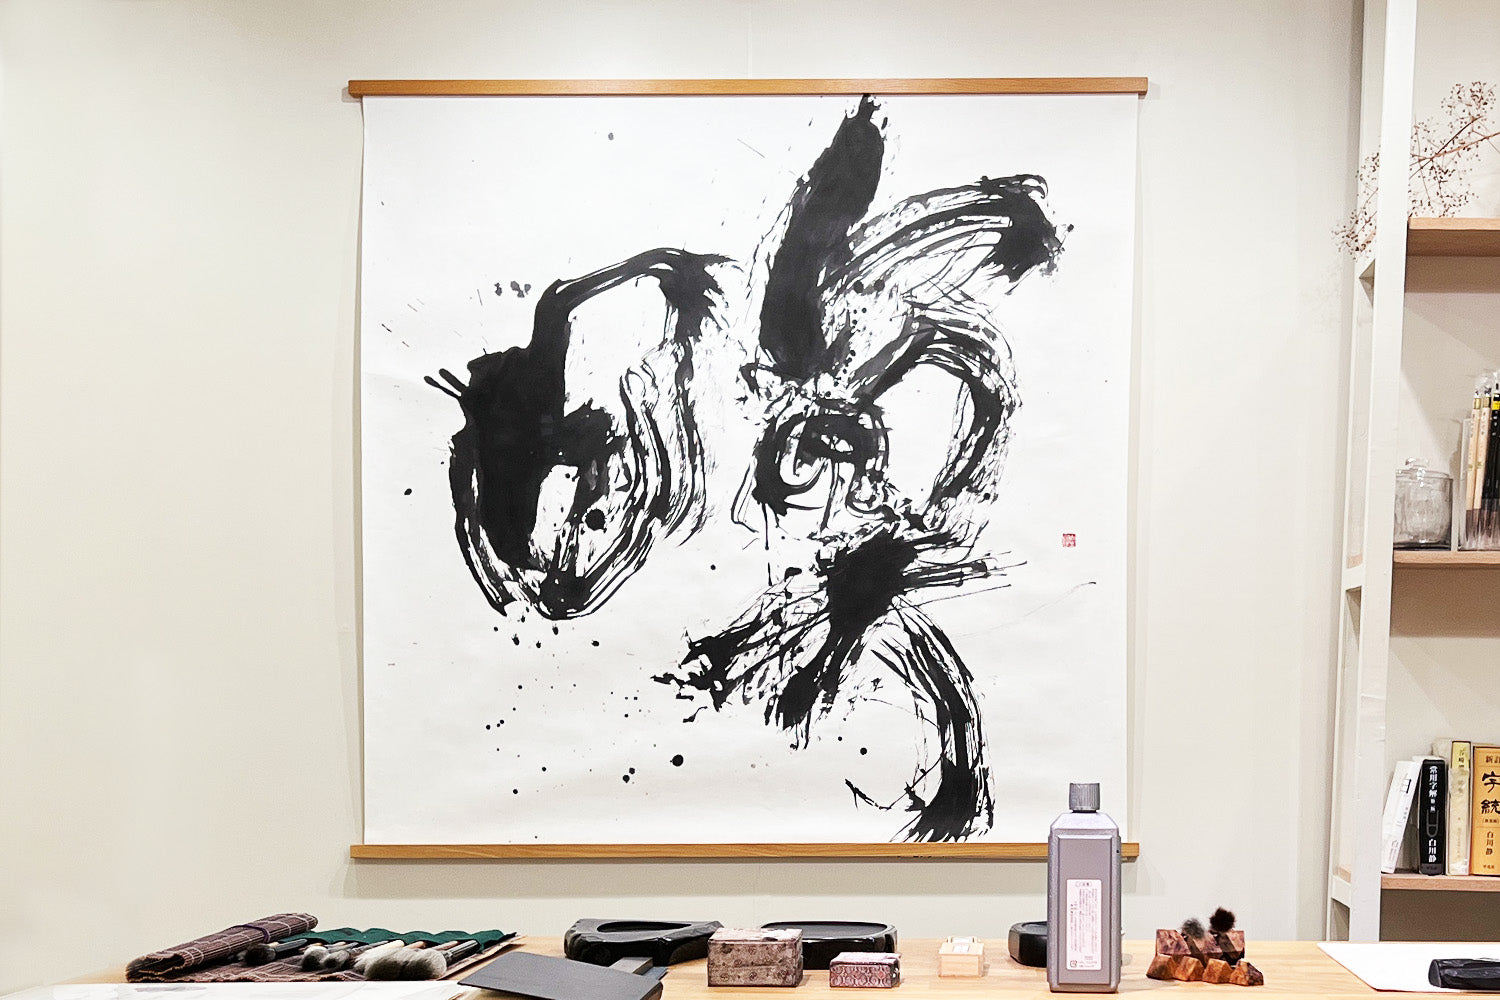 A calligraphy piece by Aoi Yamaguchi, entitled “Meditate” hangs on the wall behind a table display of brushes, ink and other equipment in her studio.